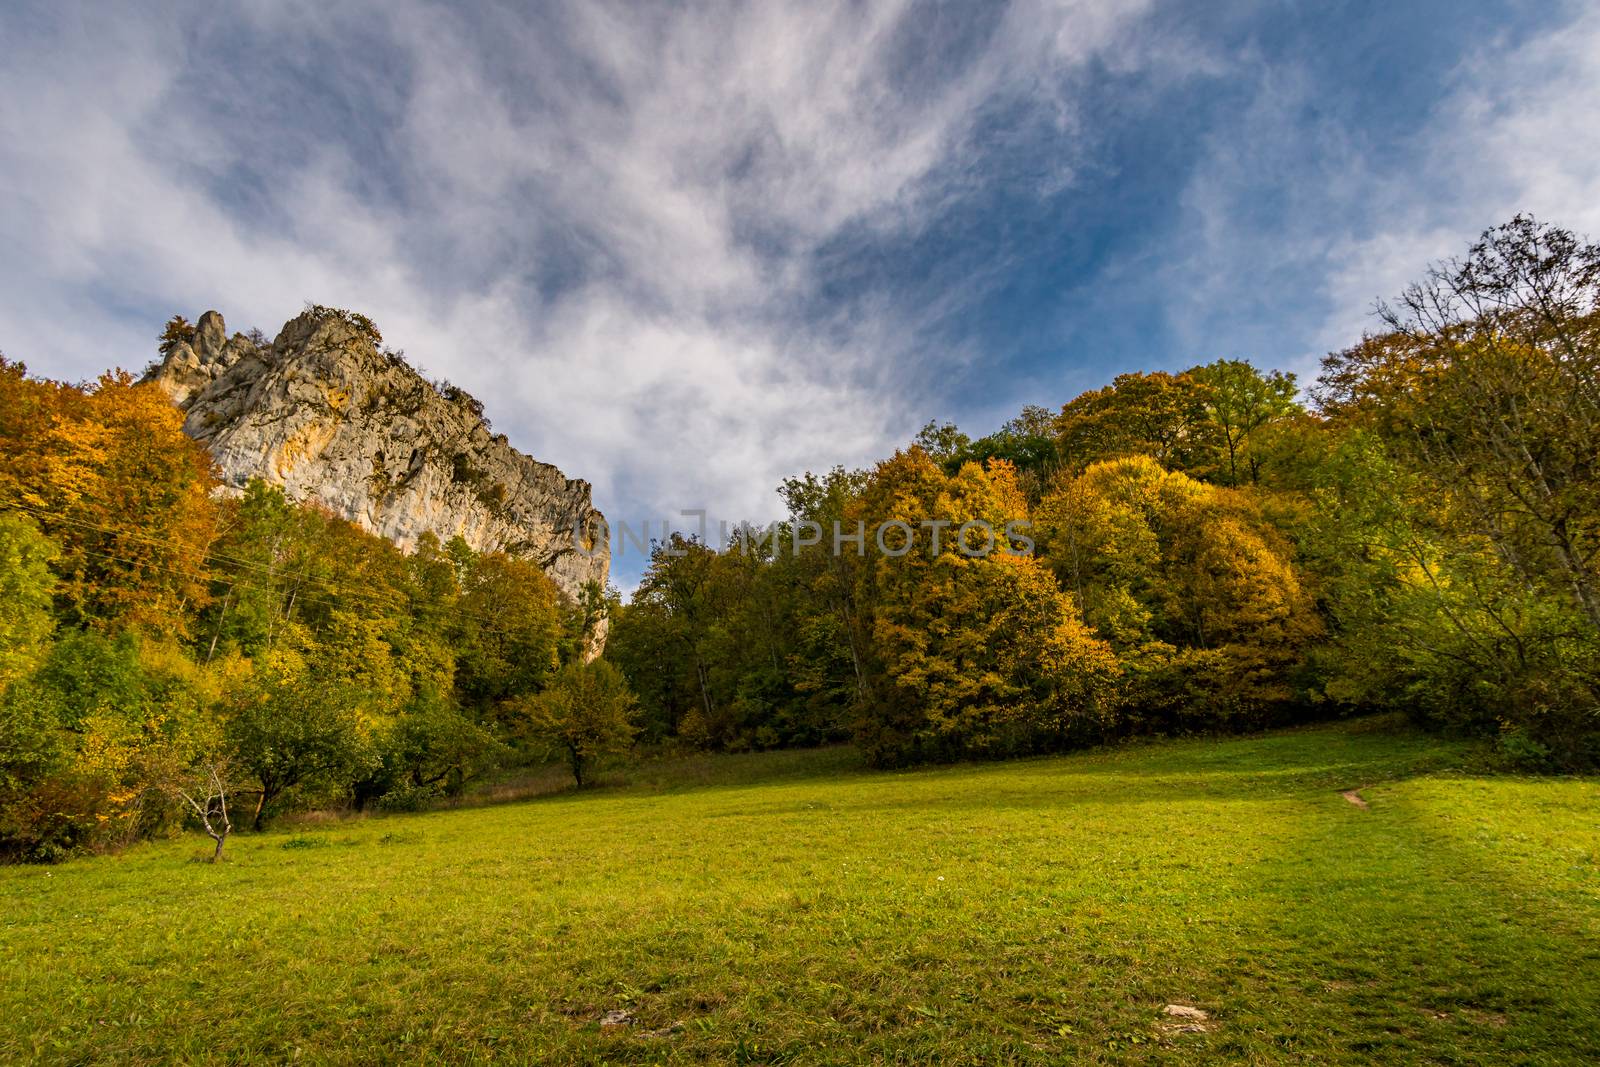 Fantastic autumn hike in the beautiful Danube valley near the Beuron monastery by mindscapephotos